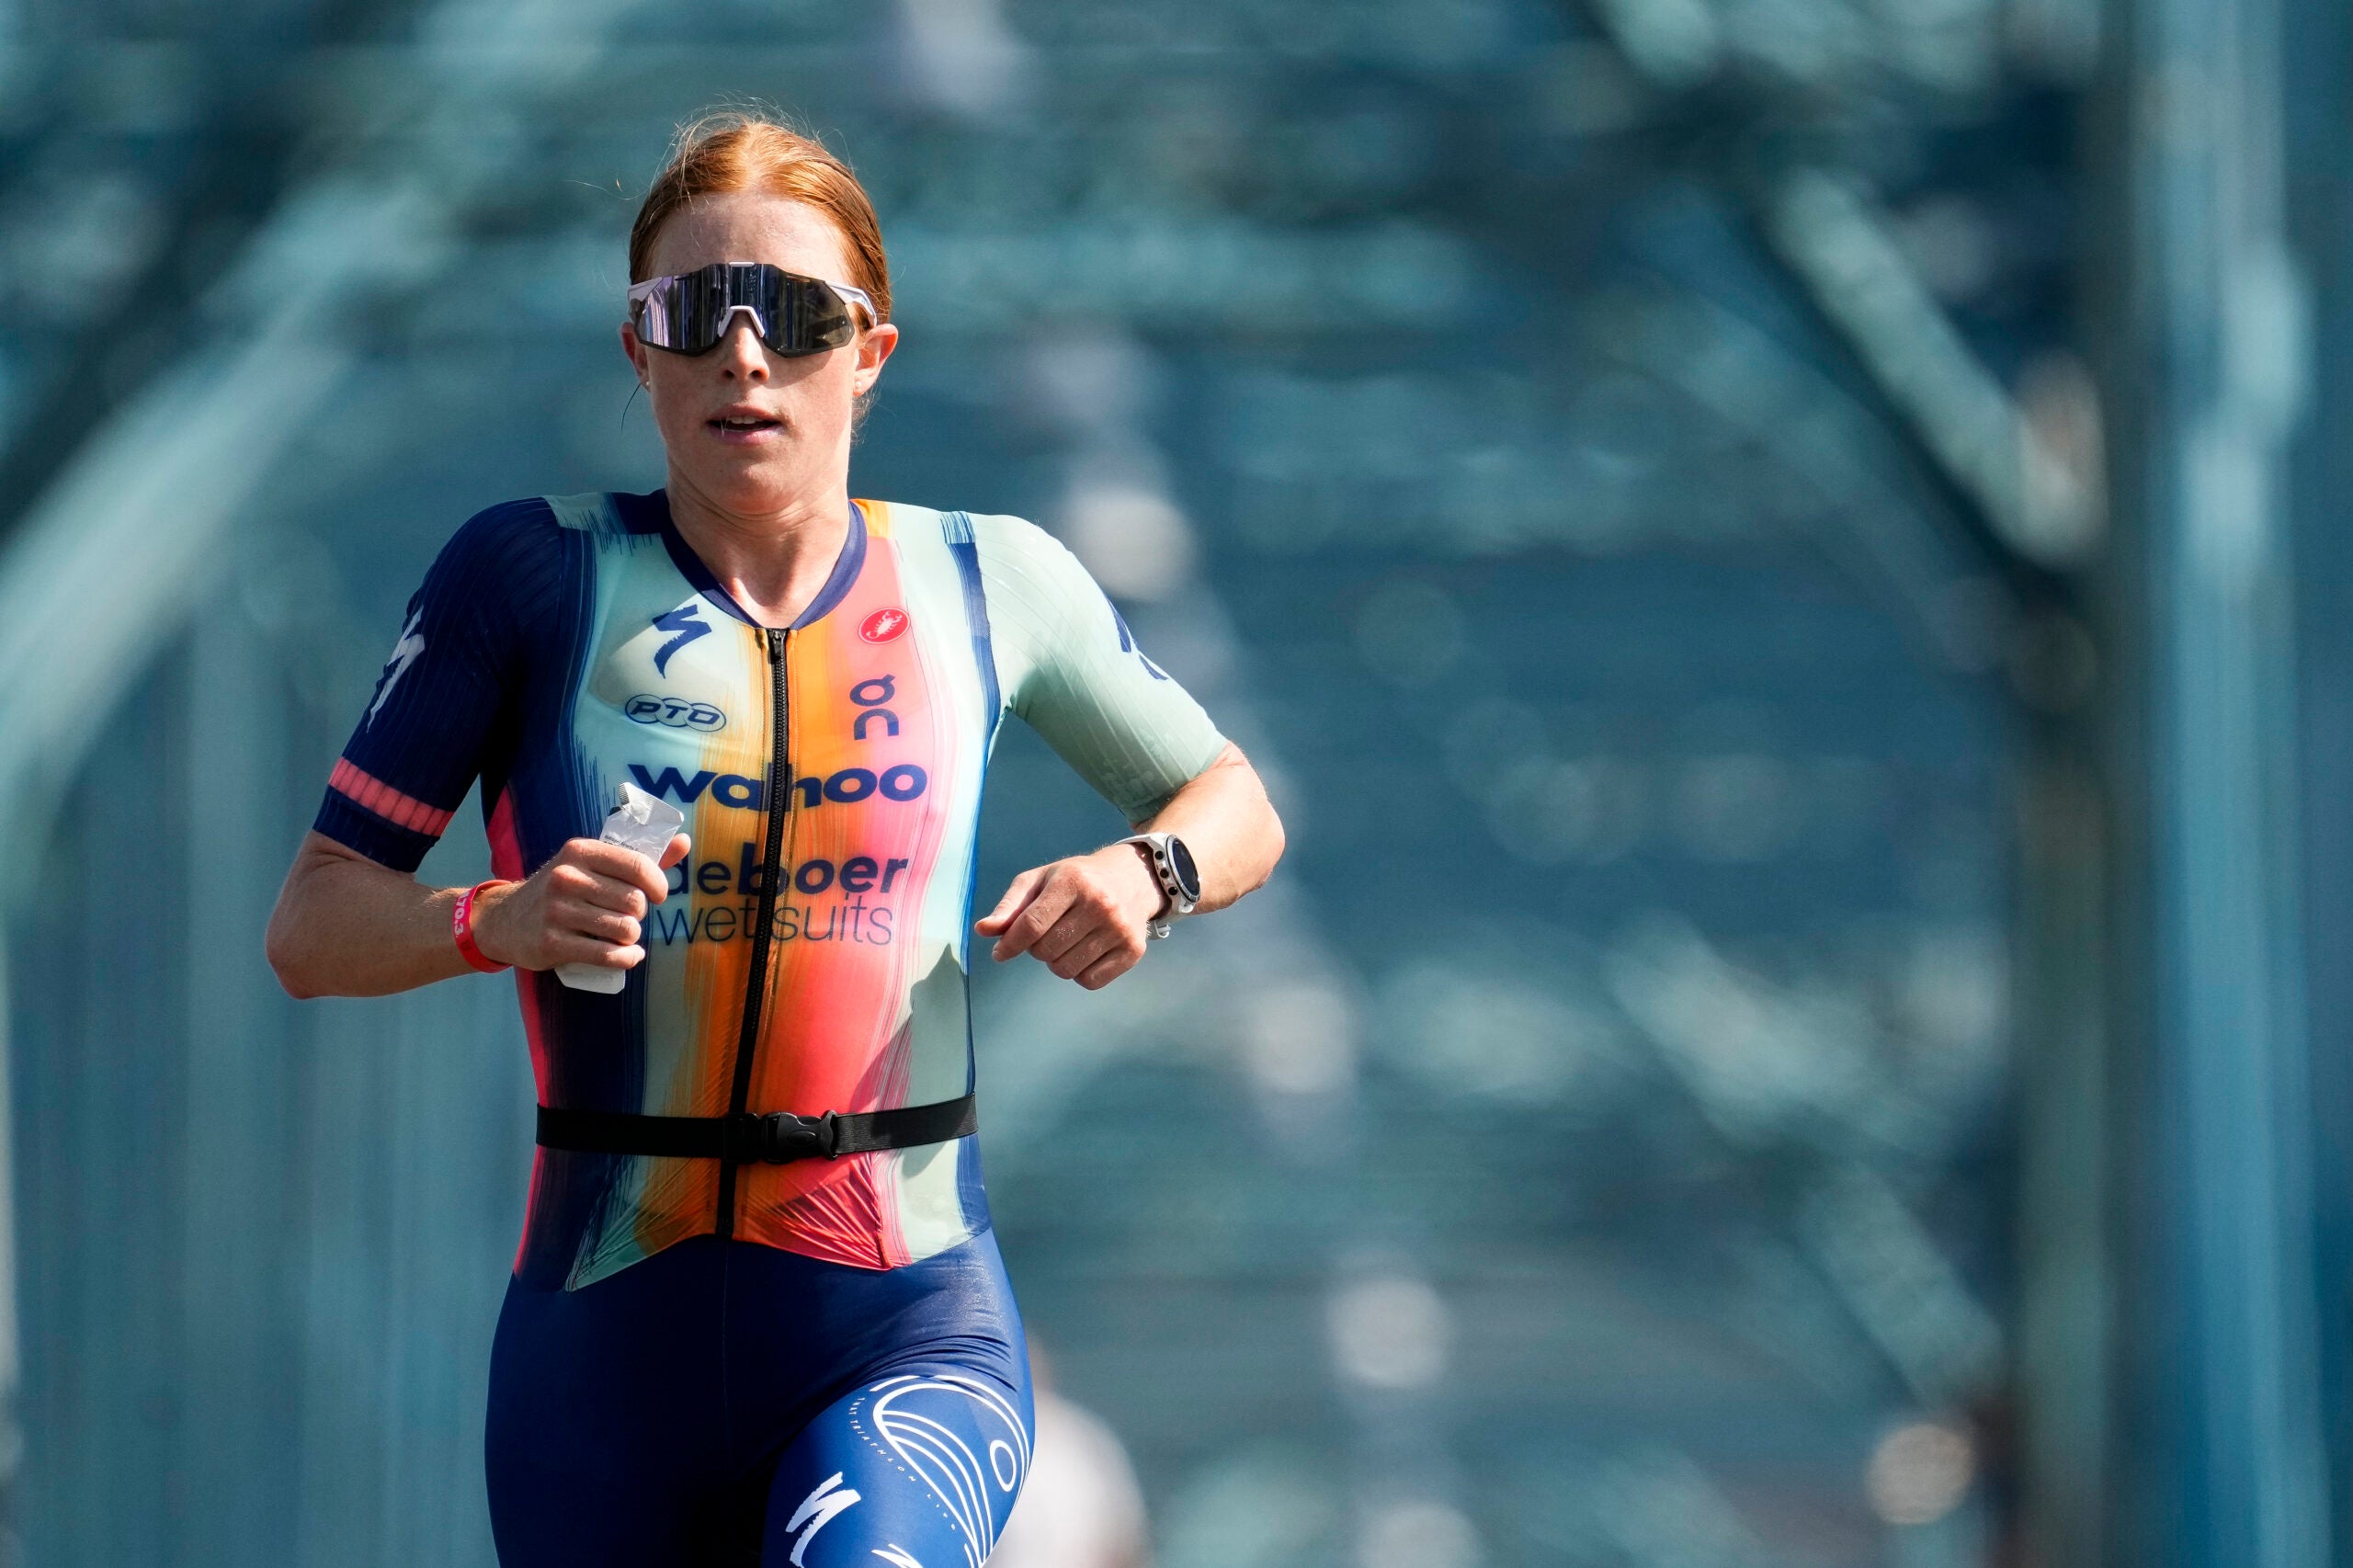 Paula Findlay of Canada leads the Women's Professional race on the run course during IRONMAN 70.3 Chattanooga on May 21, 2023 in Chattanooga, Tennessee.